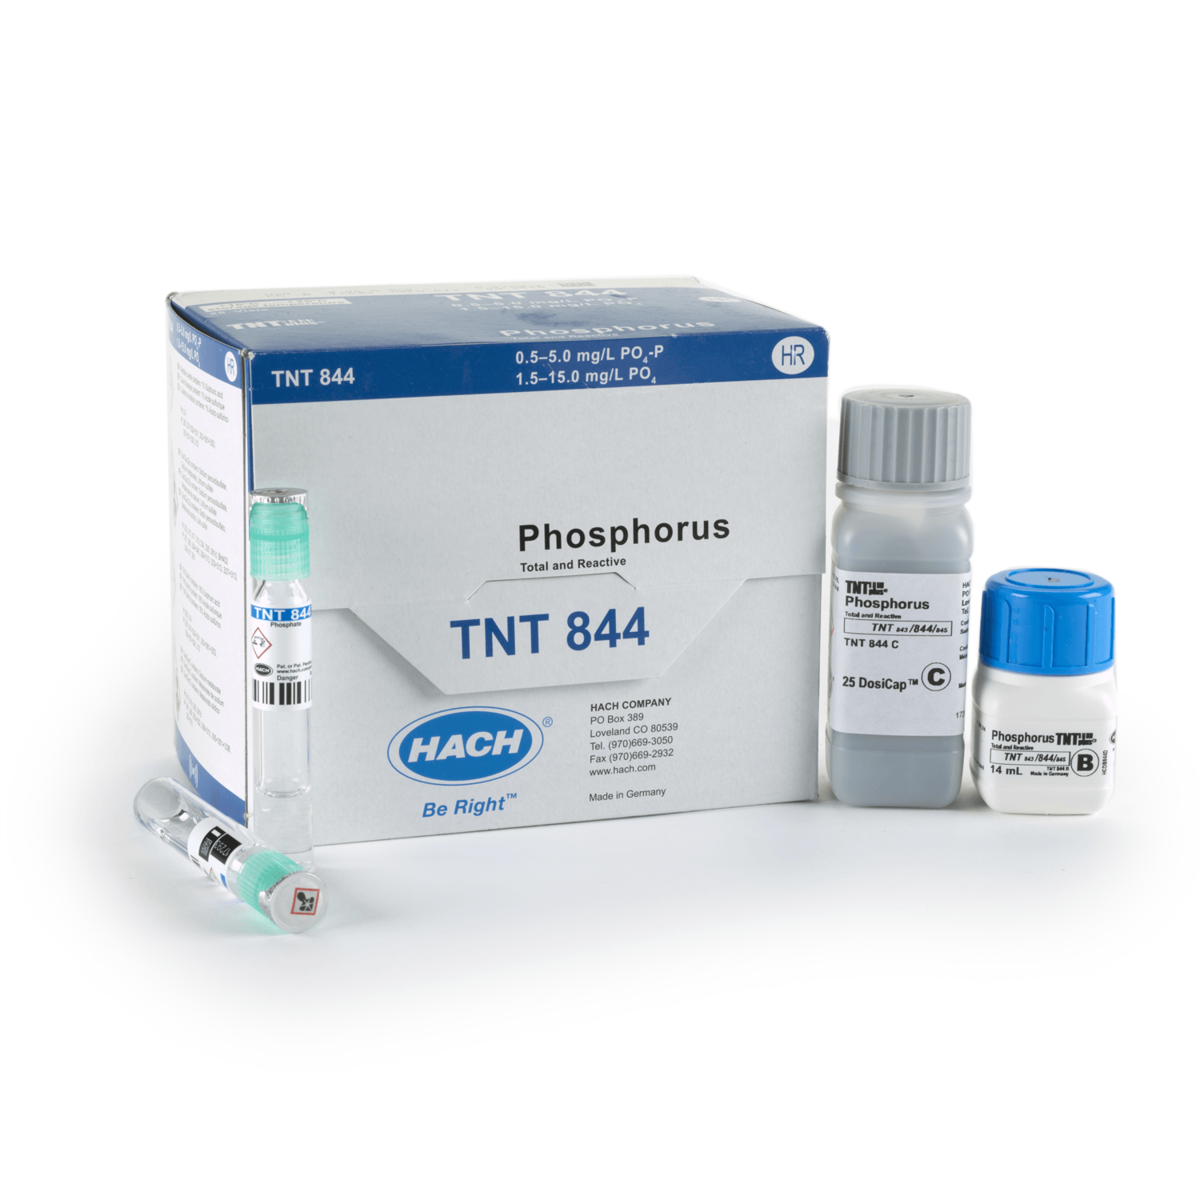 Hach Phosphorus (Reactive and Total) TNTplus Vial Test, HR, 1.5-15.0 mg/L PO₄, 25 Tests, TNT844